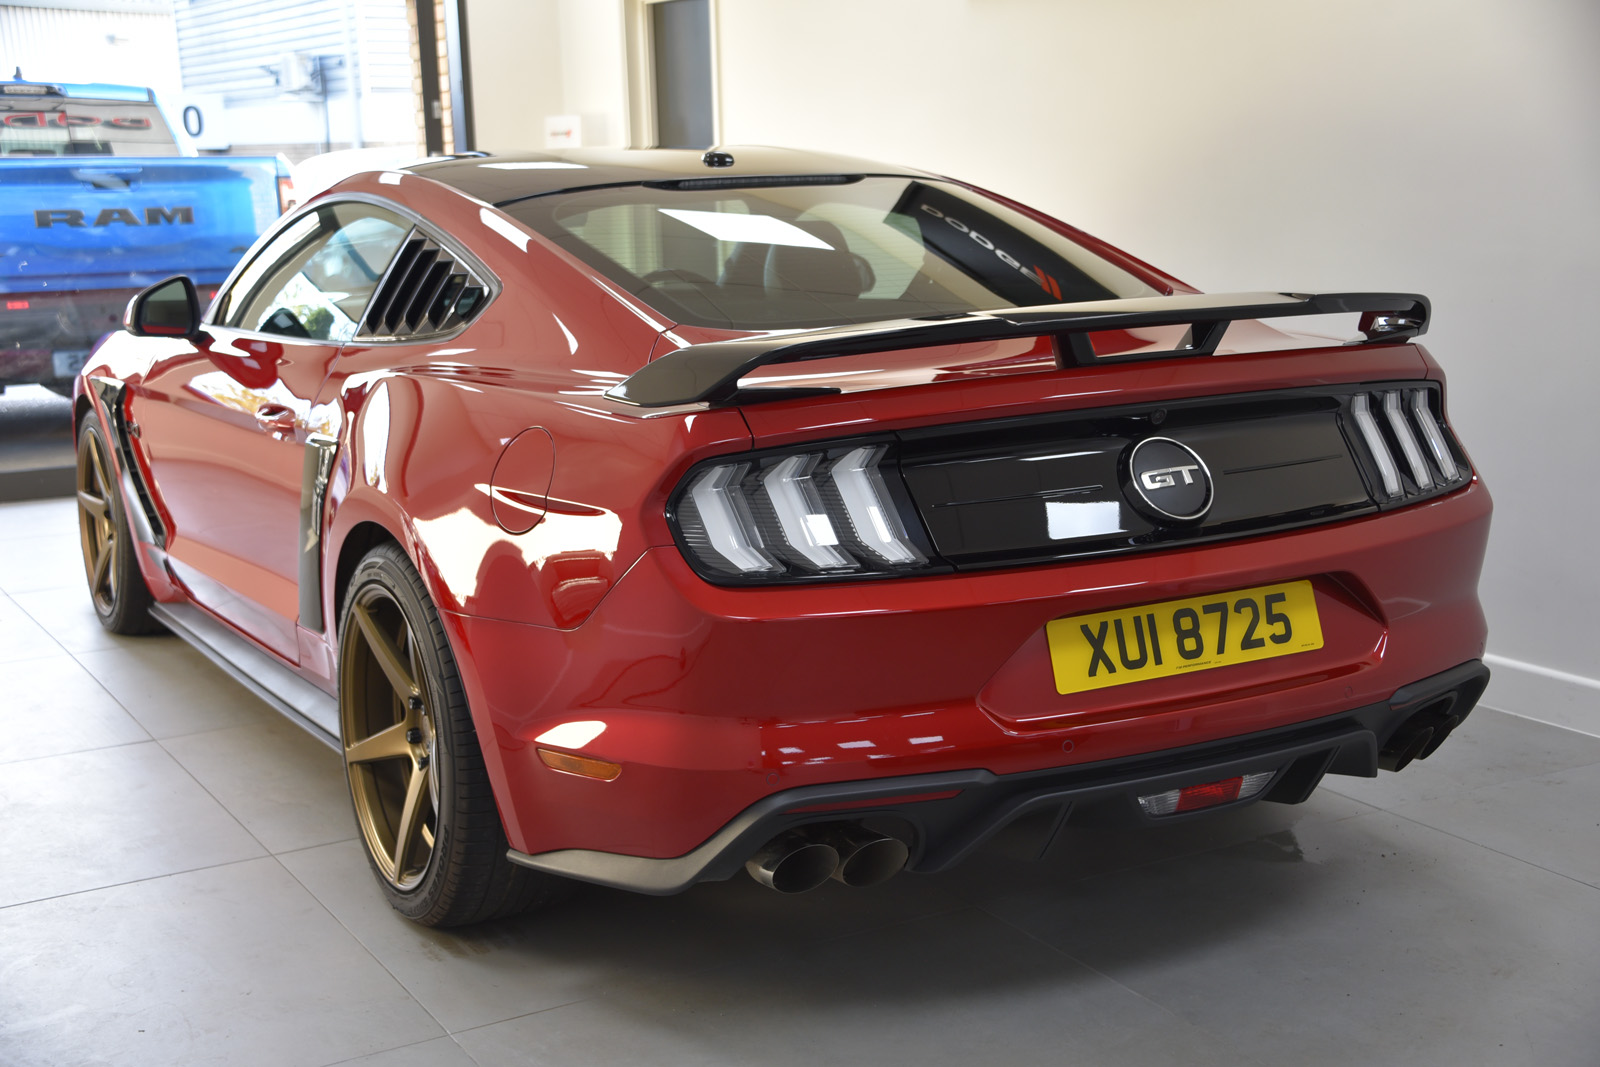 Ford Mustang GT 5.0V8 55 Edition RHD Auto - 2020